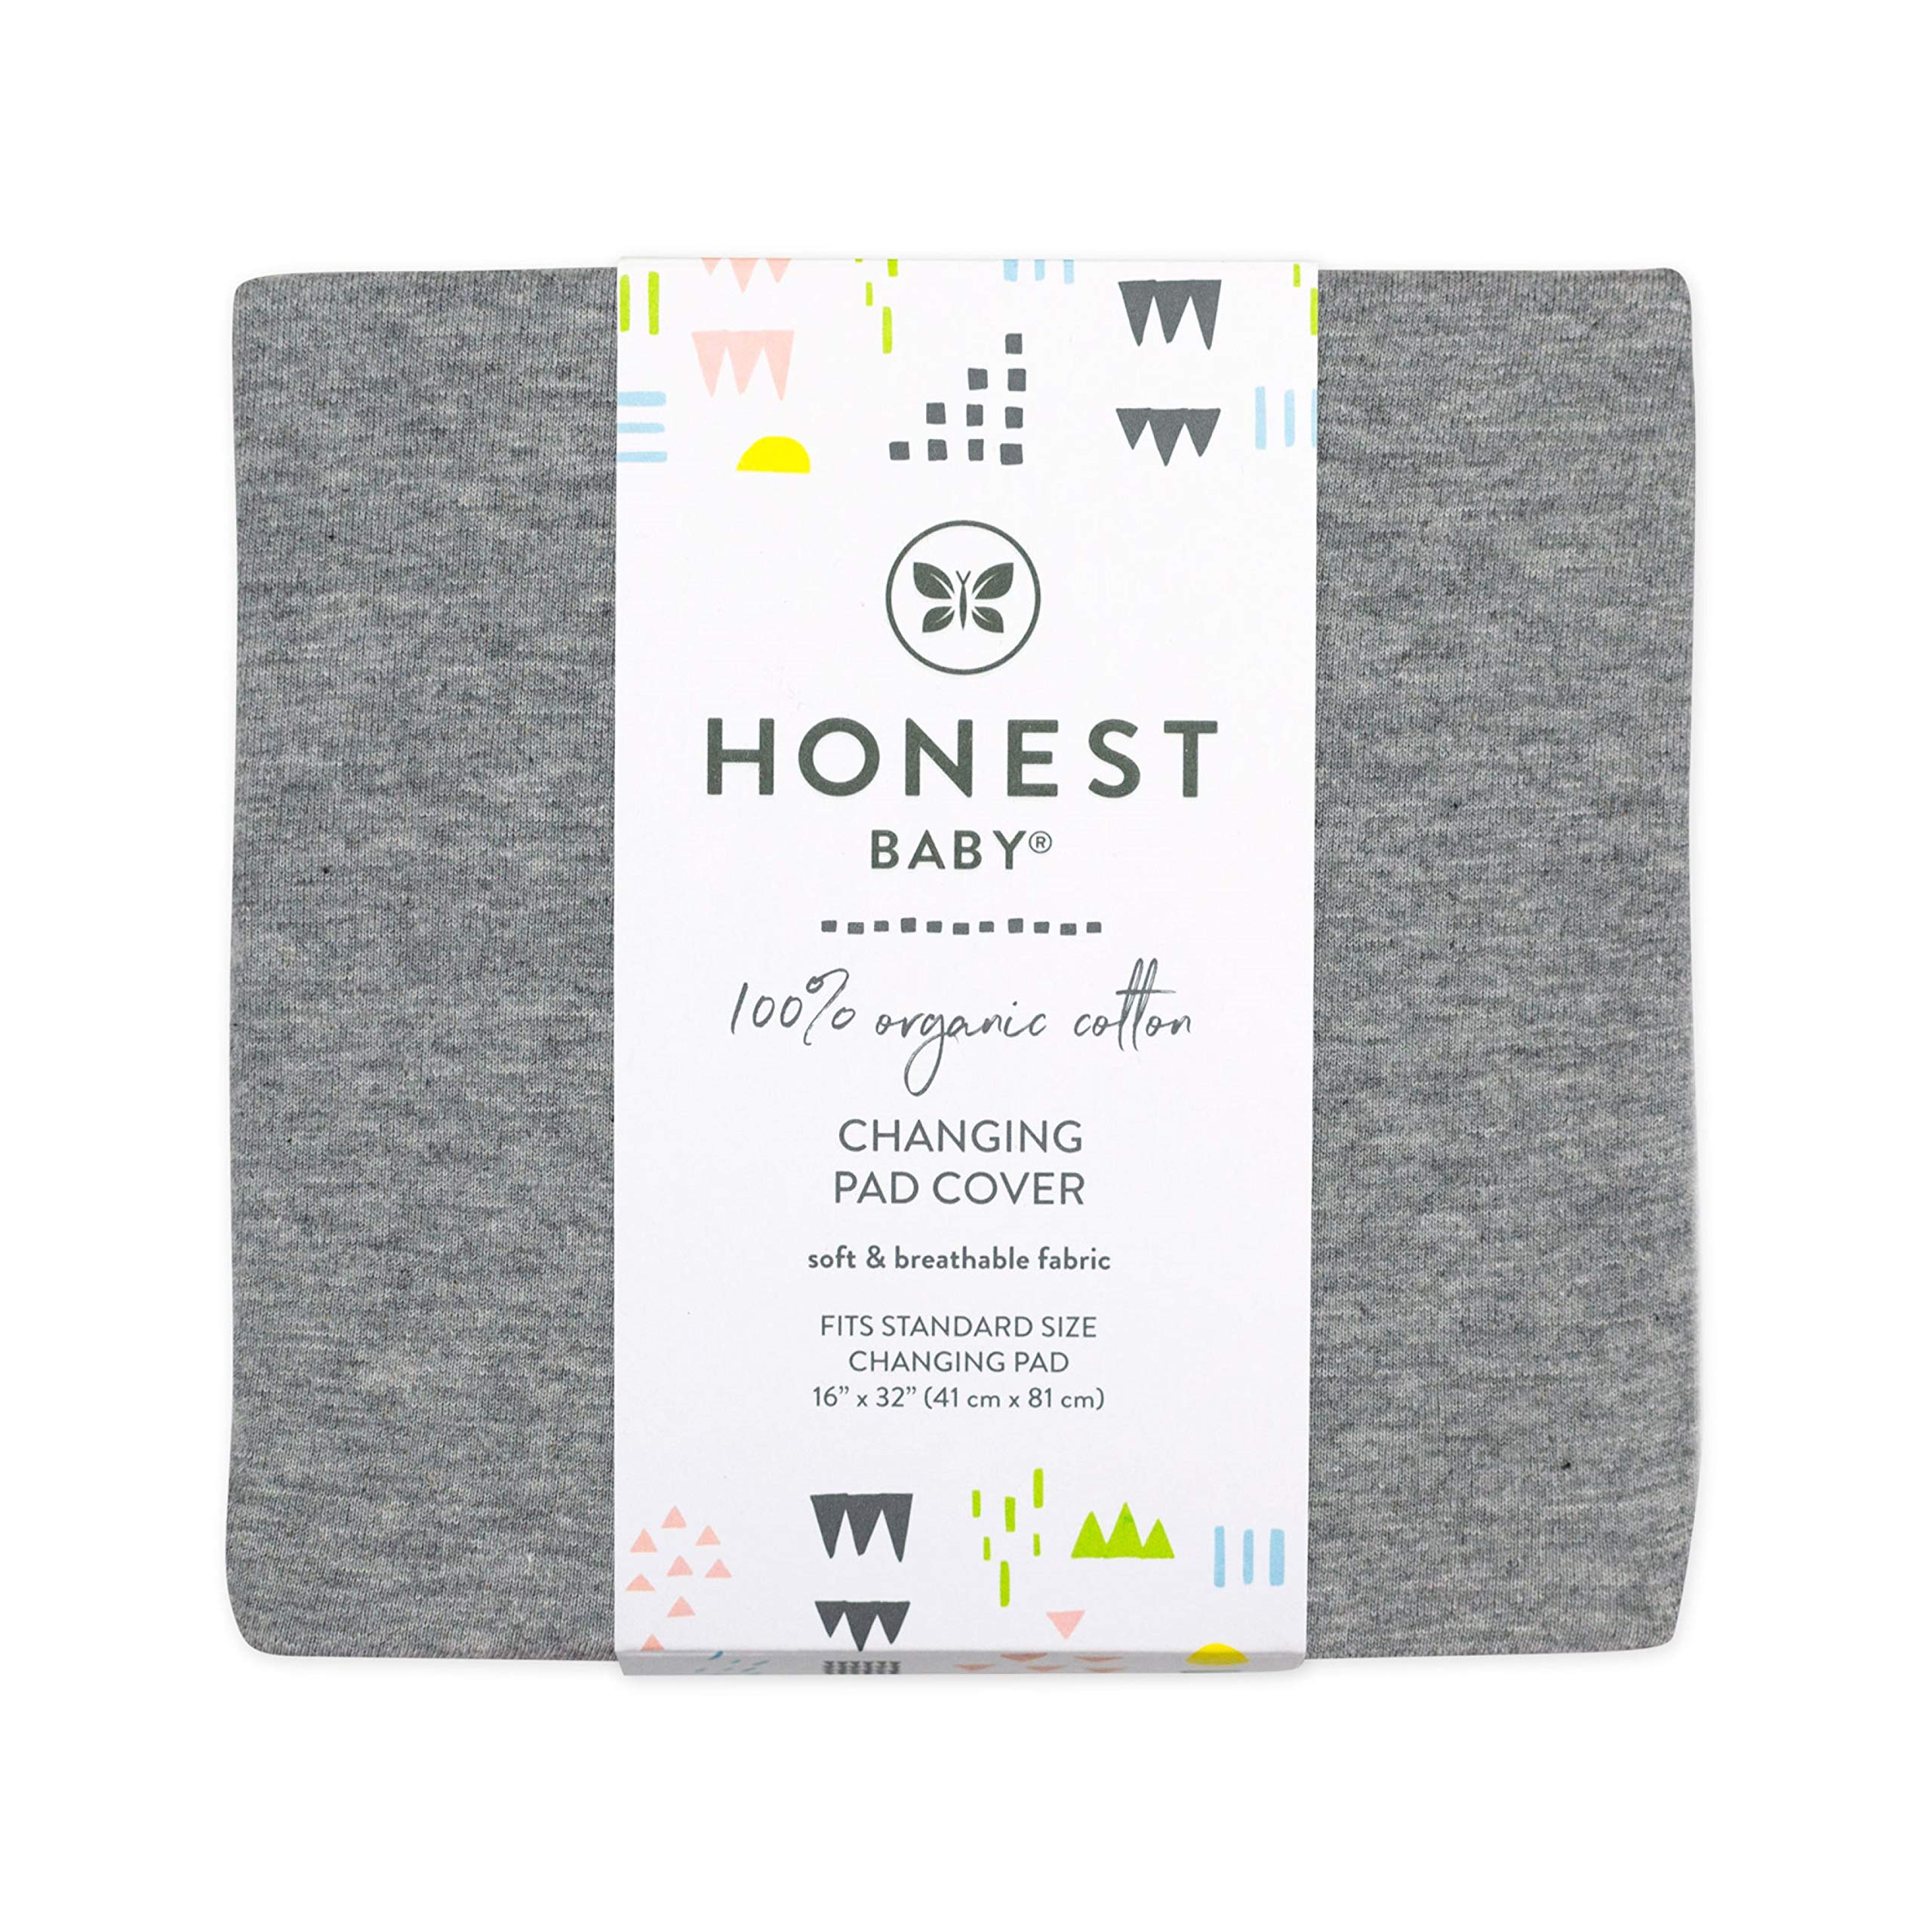 HonestBaby unisex baby Organic Cotton Changing Pad Cover and Toddler Sleepers, Gray Heather, One Size US